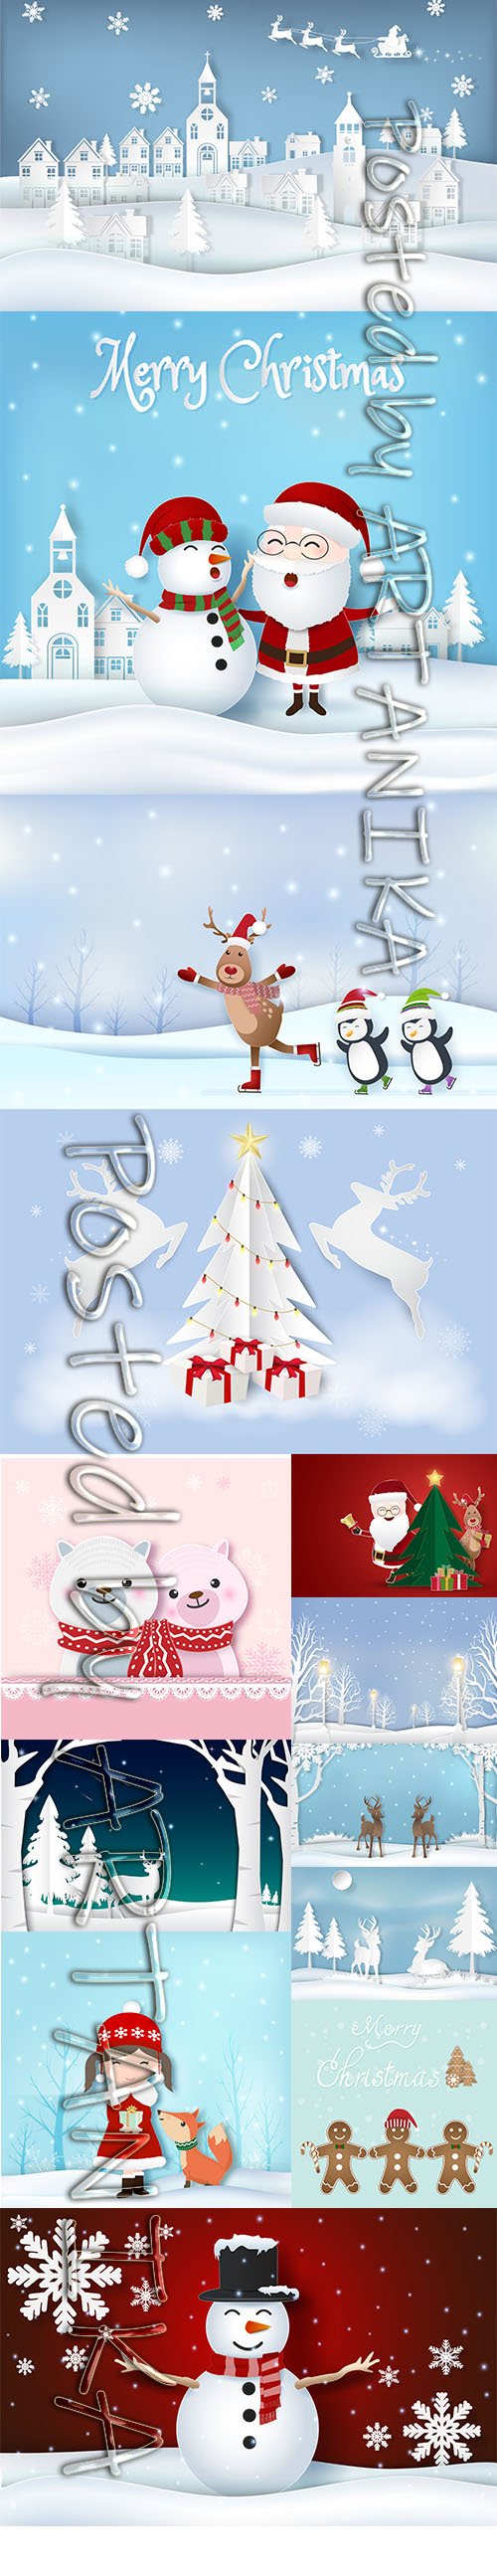 Winter Holiday City Illustration and Santas Gifts Backgrounds Vol 2